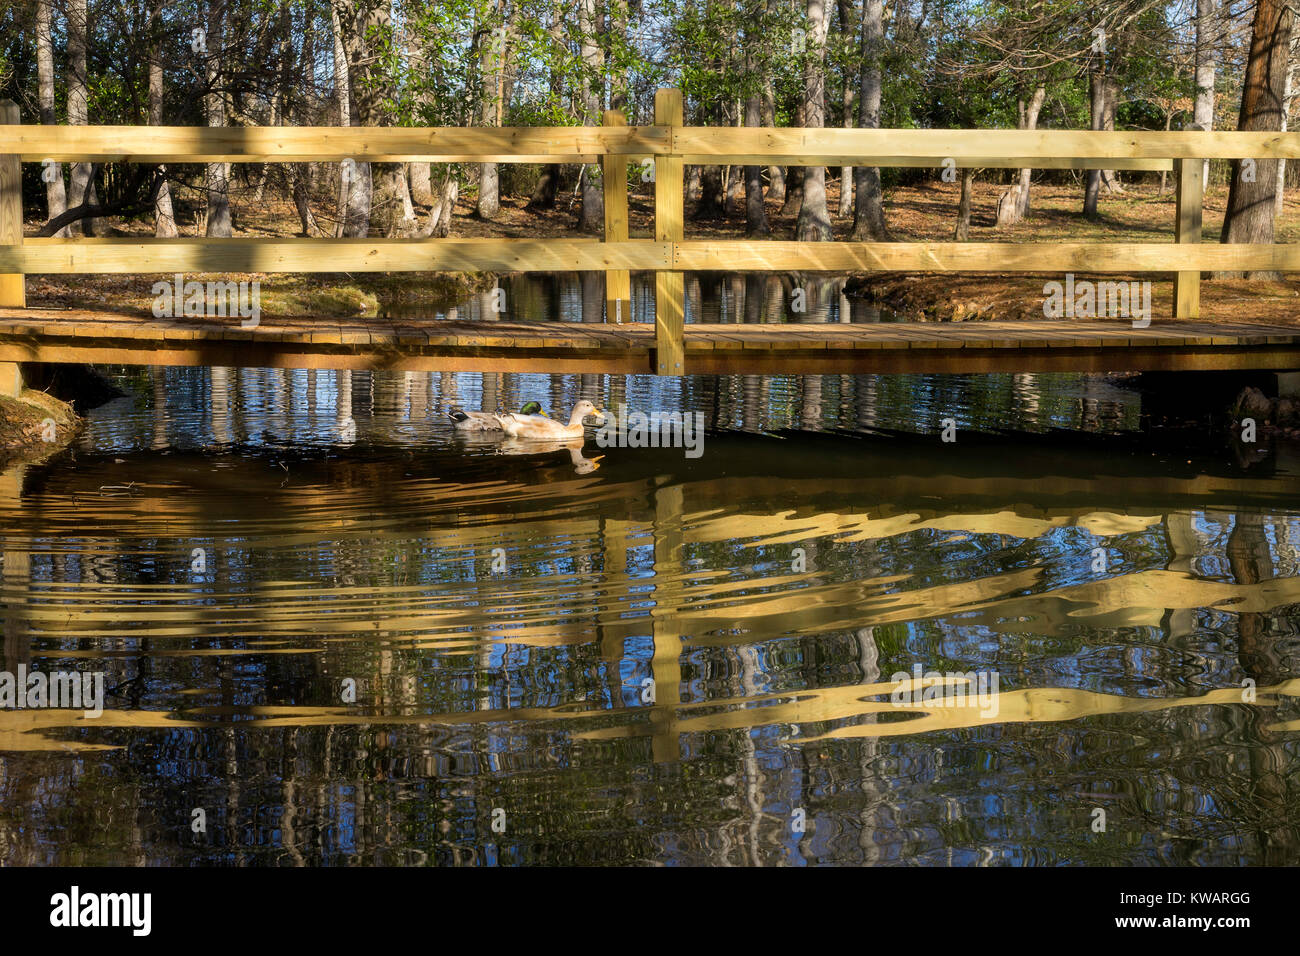 Fayette, Alabama. 2nd Jan, 2018. The temperatures may be cold, but the sun was out this afternoon, Tuesday,  Jan. 2nd, 2018 as were these two ducks at Guthrie Smith Park in Fayette, Alabama.The temperatures have been well below normal for this time of year in the south. Credit: Tim Thompson/Alamy Live News Stock Photo